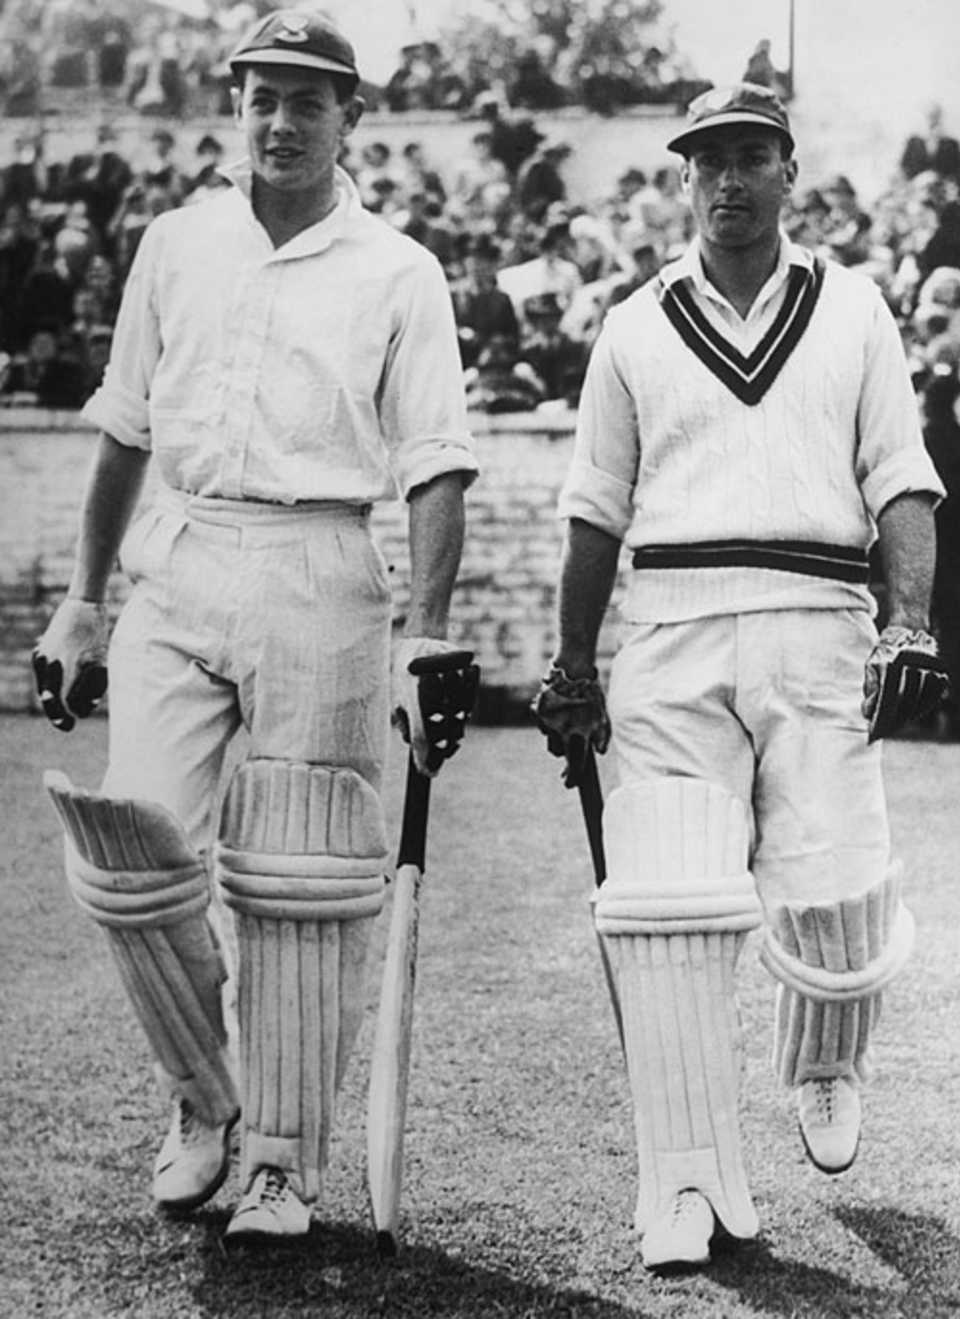 David Sheppard and Don Kenyon walk out to bat, England v Rest of England, 1st day, 1st day, Bradford,  May 31, 1950